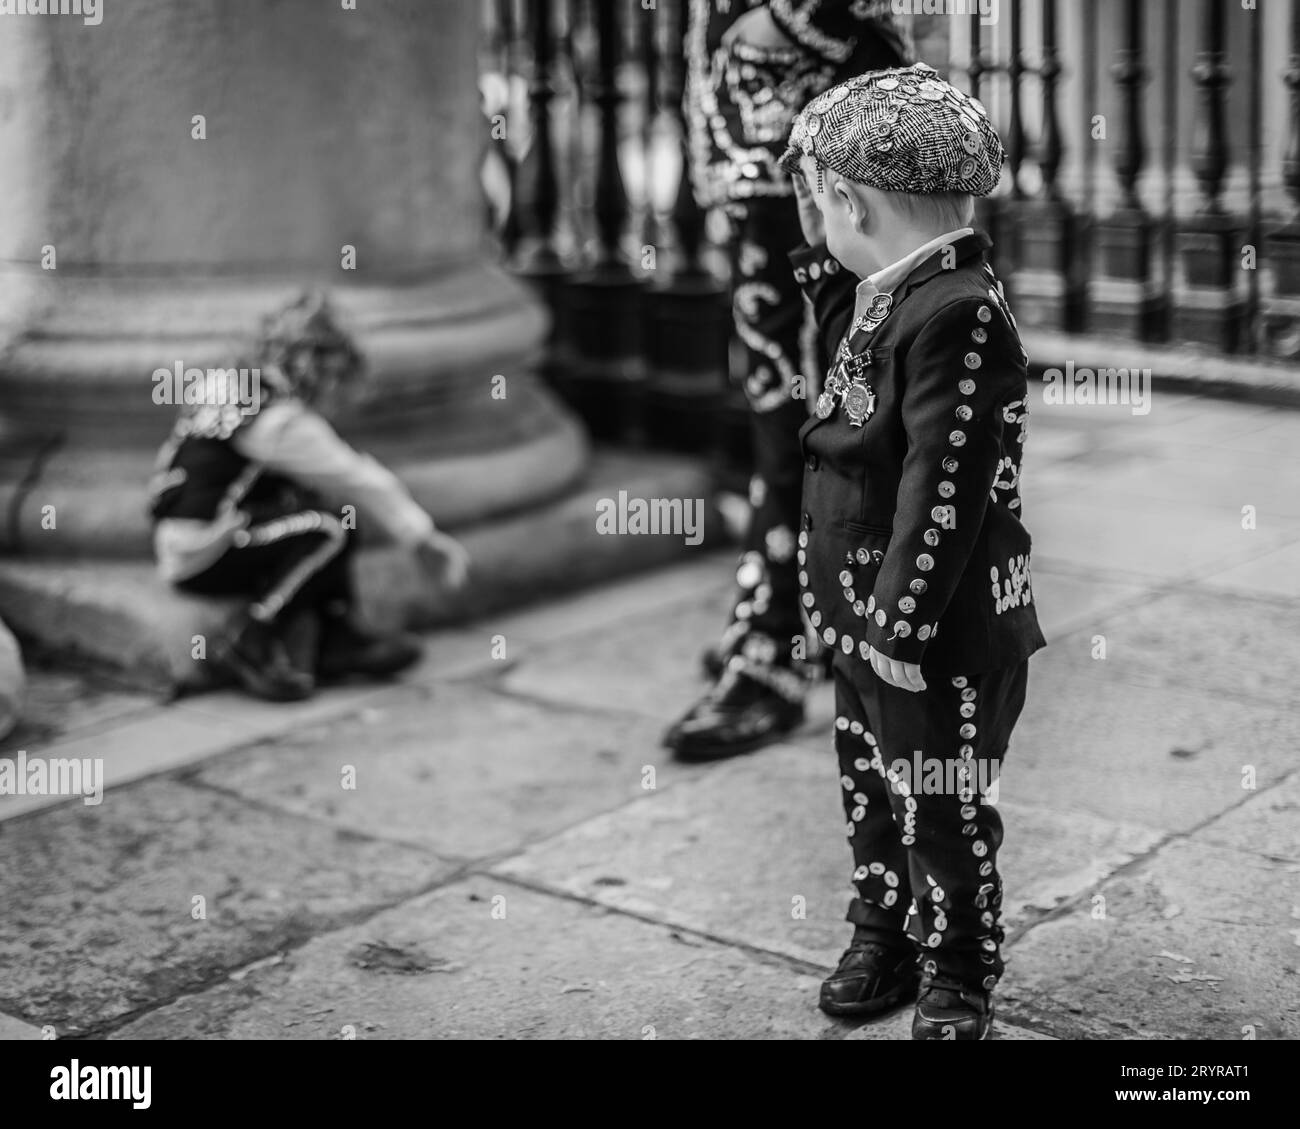 A young Pearly Prince watches over his siblings at St. Martin-in-the-Fields church in London. Stock Photo